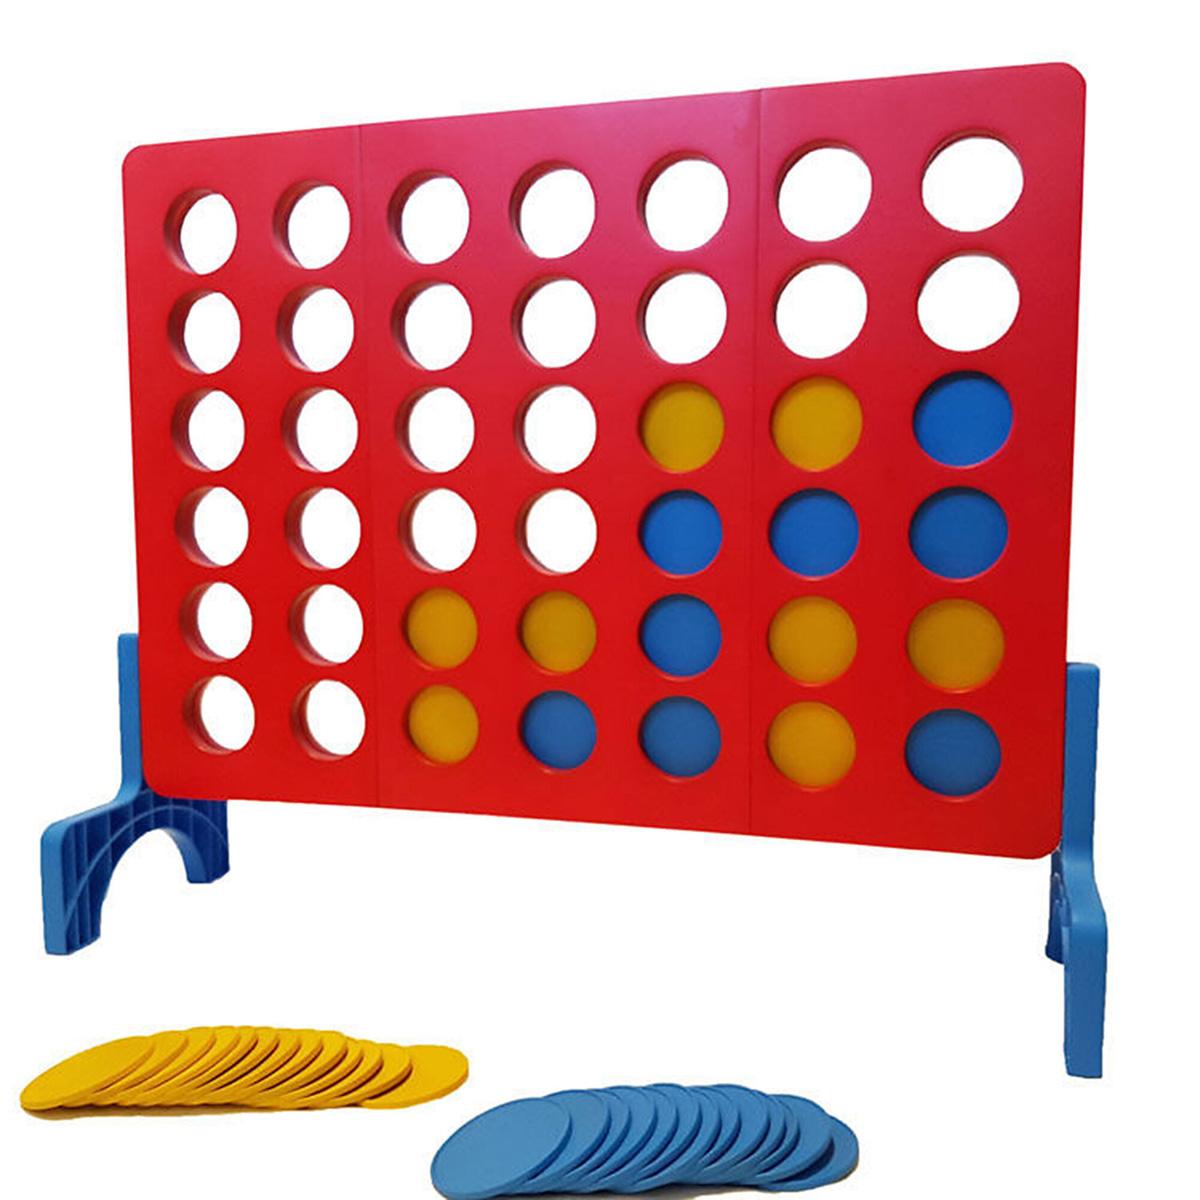 Bolaball Giant 4 in A Row Game for $24.99 Shipped